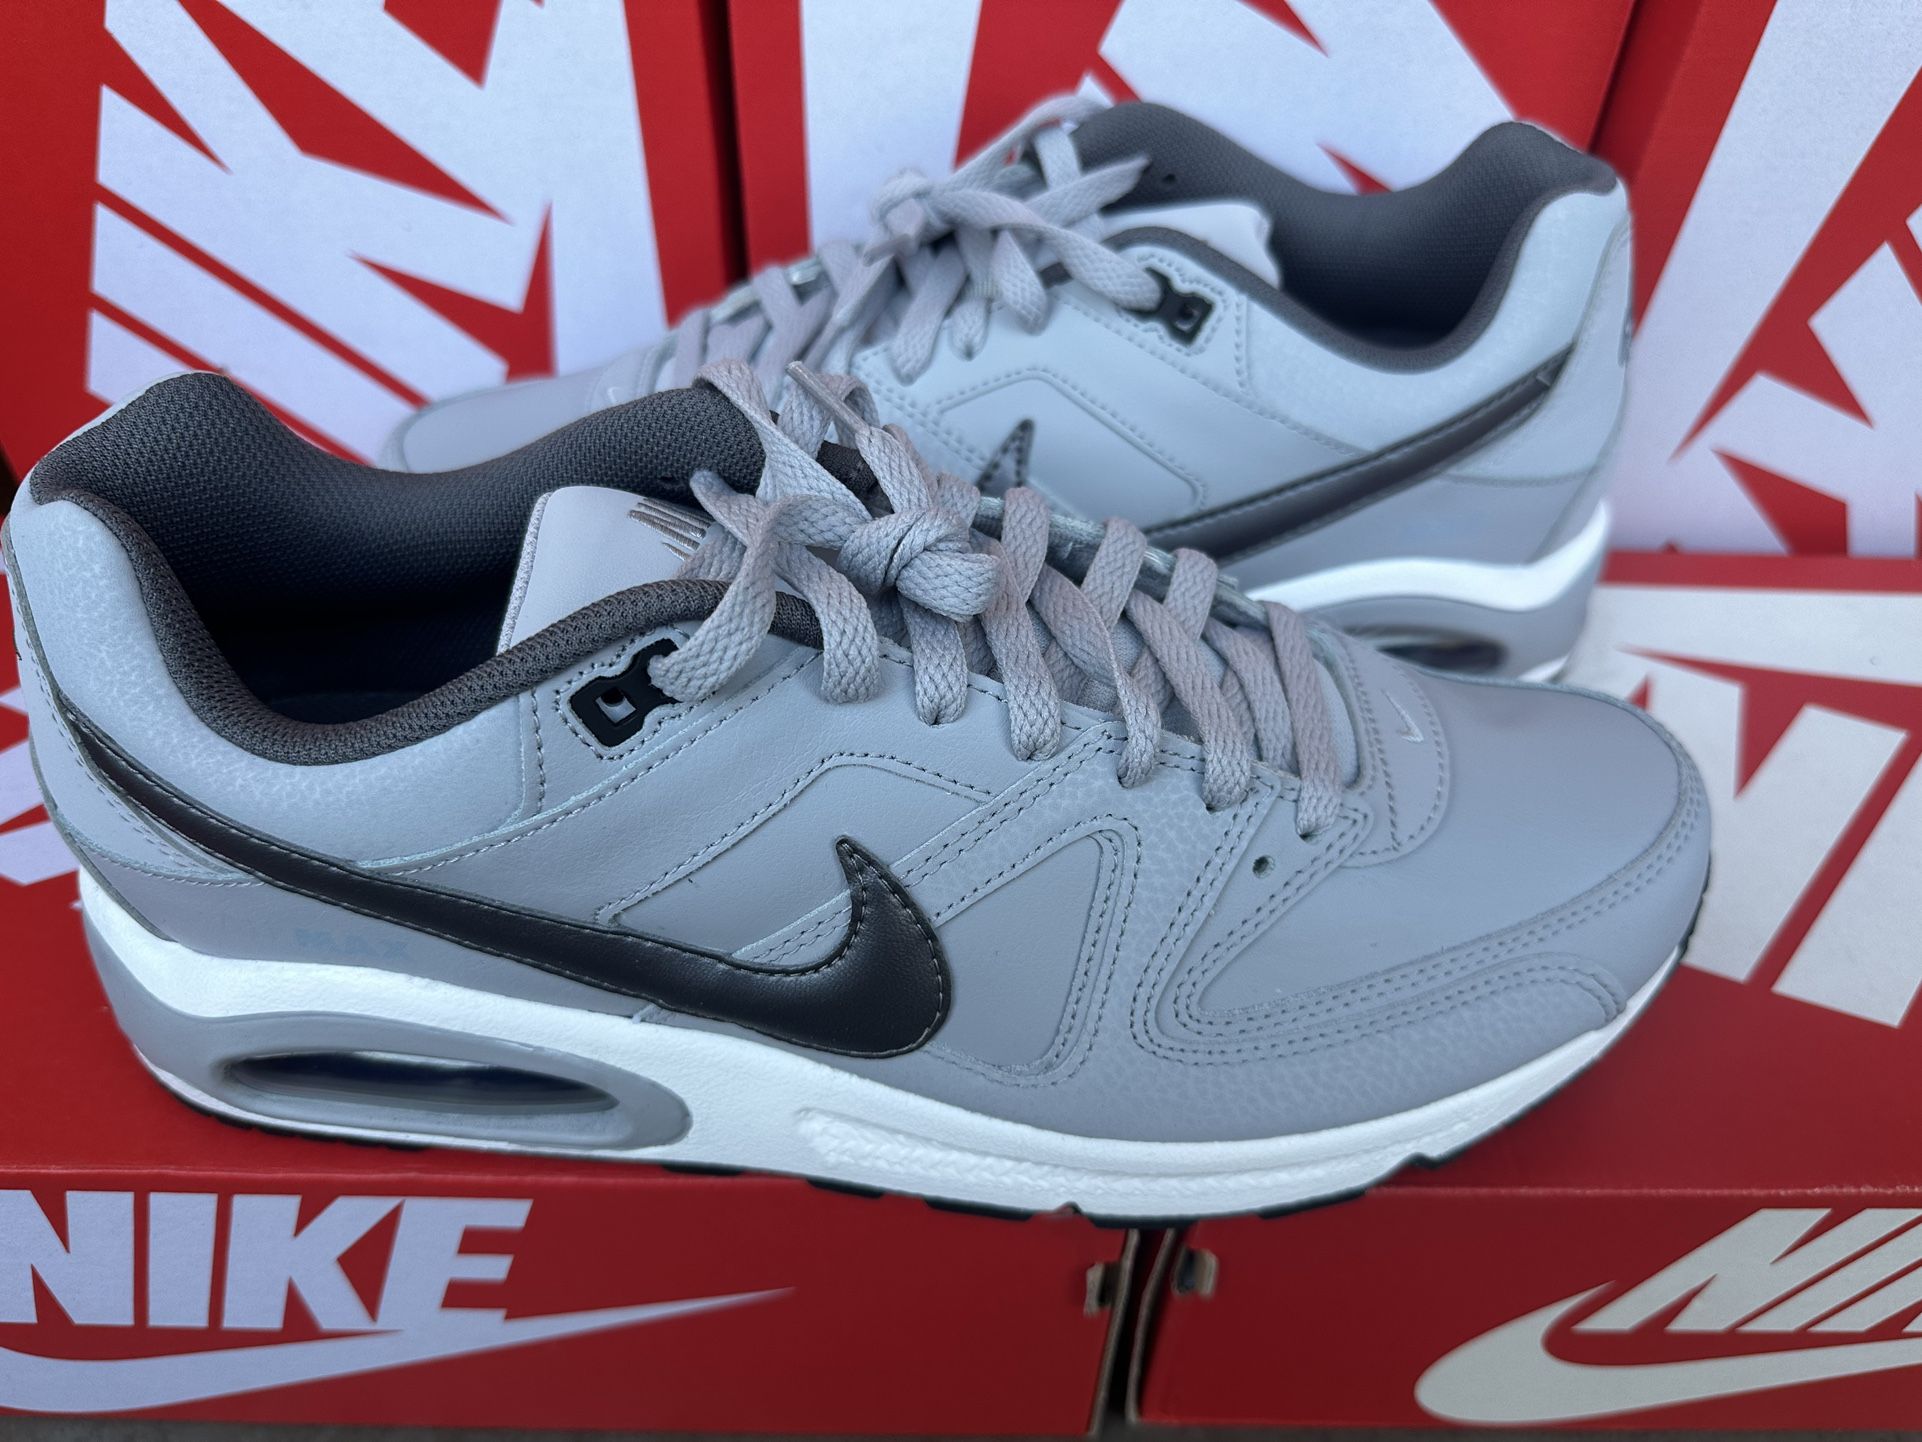 Nike Air Max Comande Leather , Size # 11 Men’s, $80 Firm 